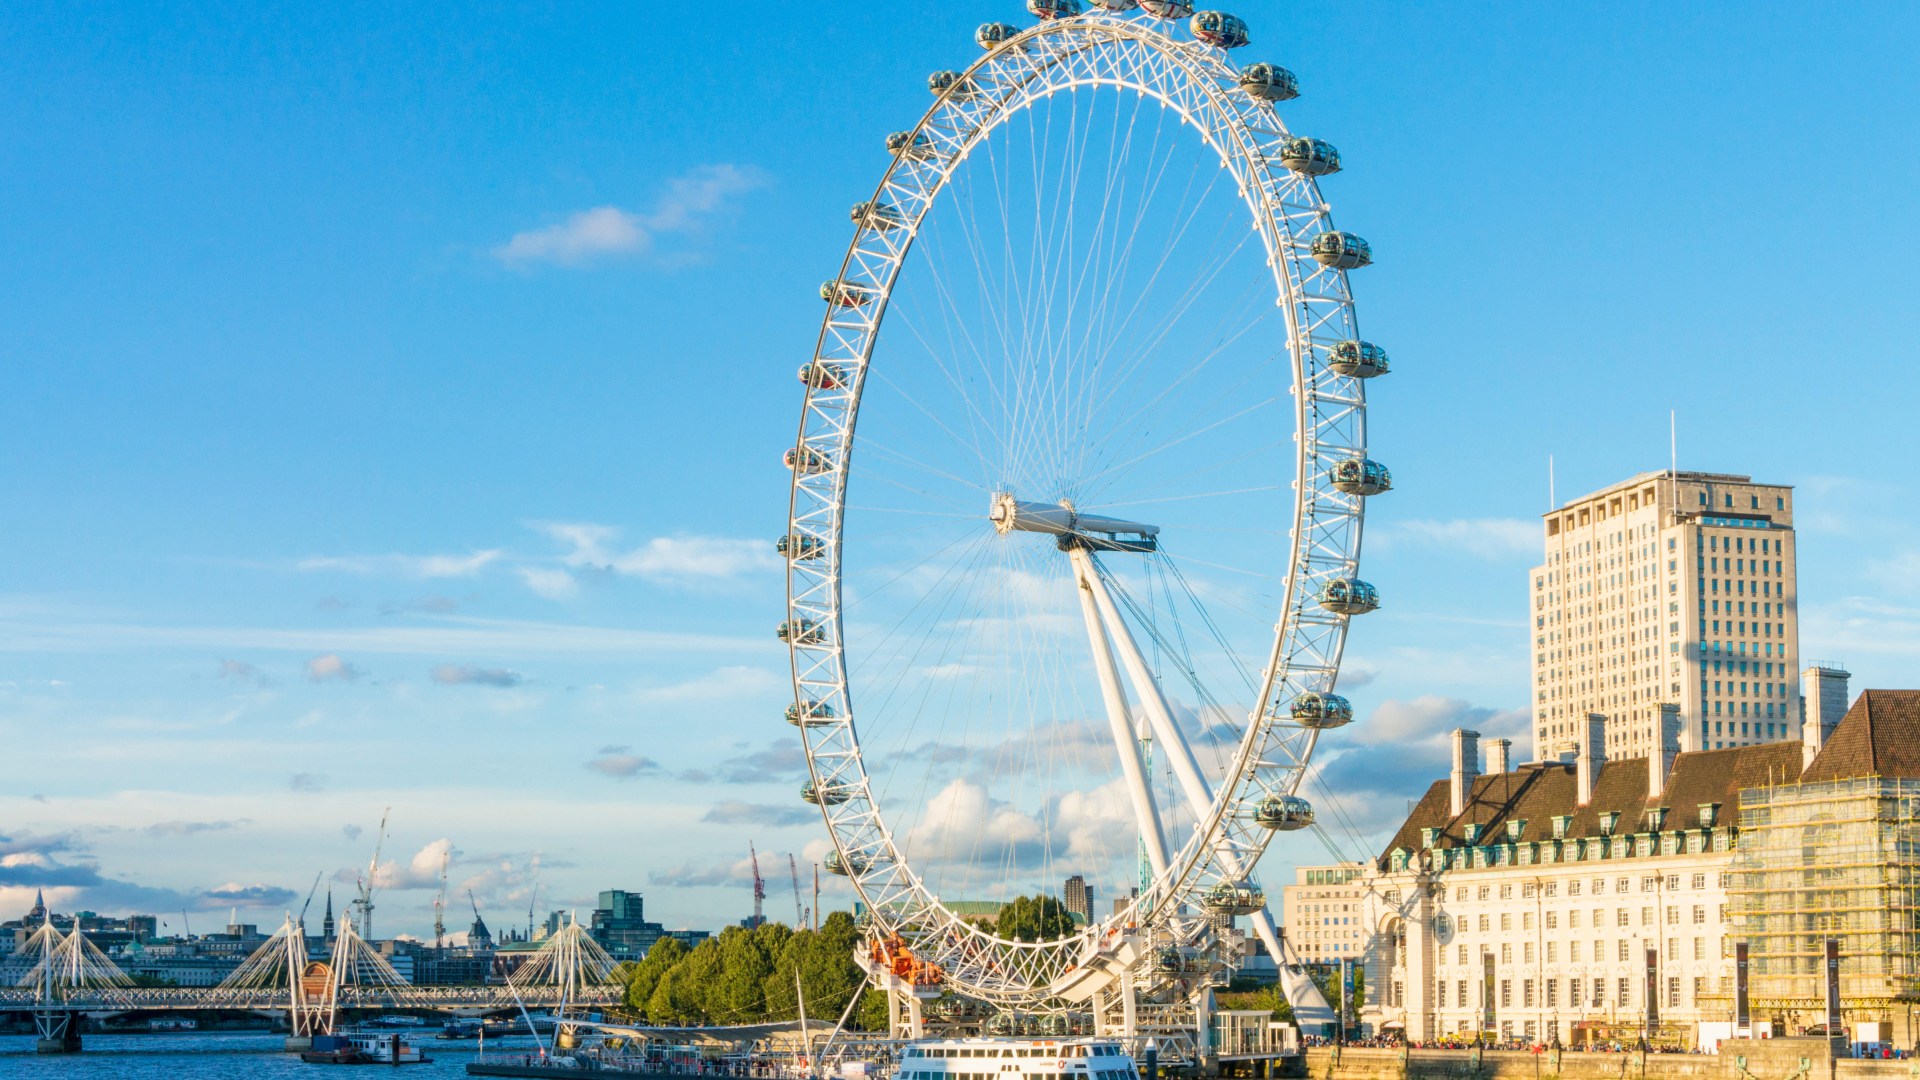 Discover the Top 10 Hotels in London with Stays from £30 per night on Tripadvisor!